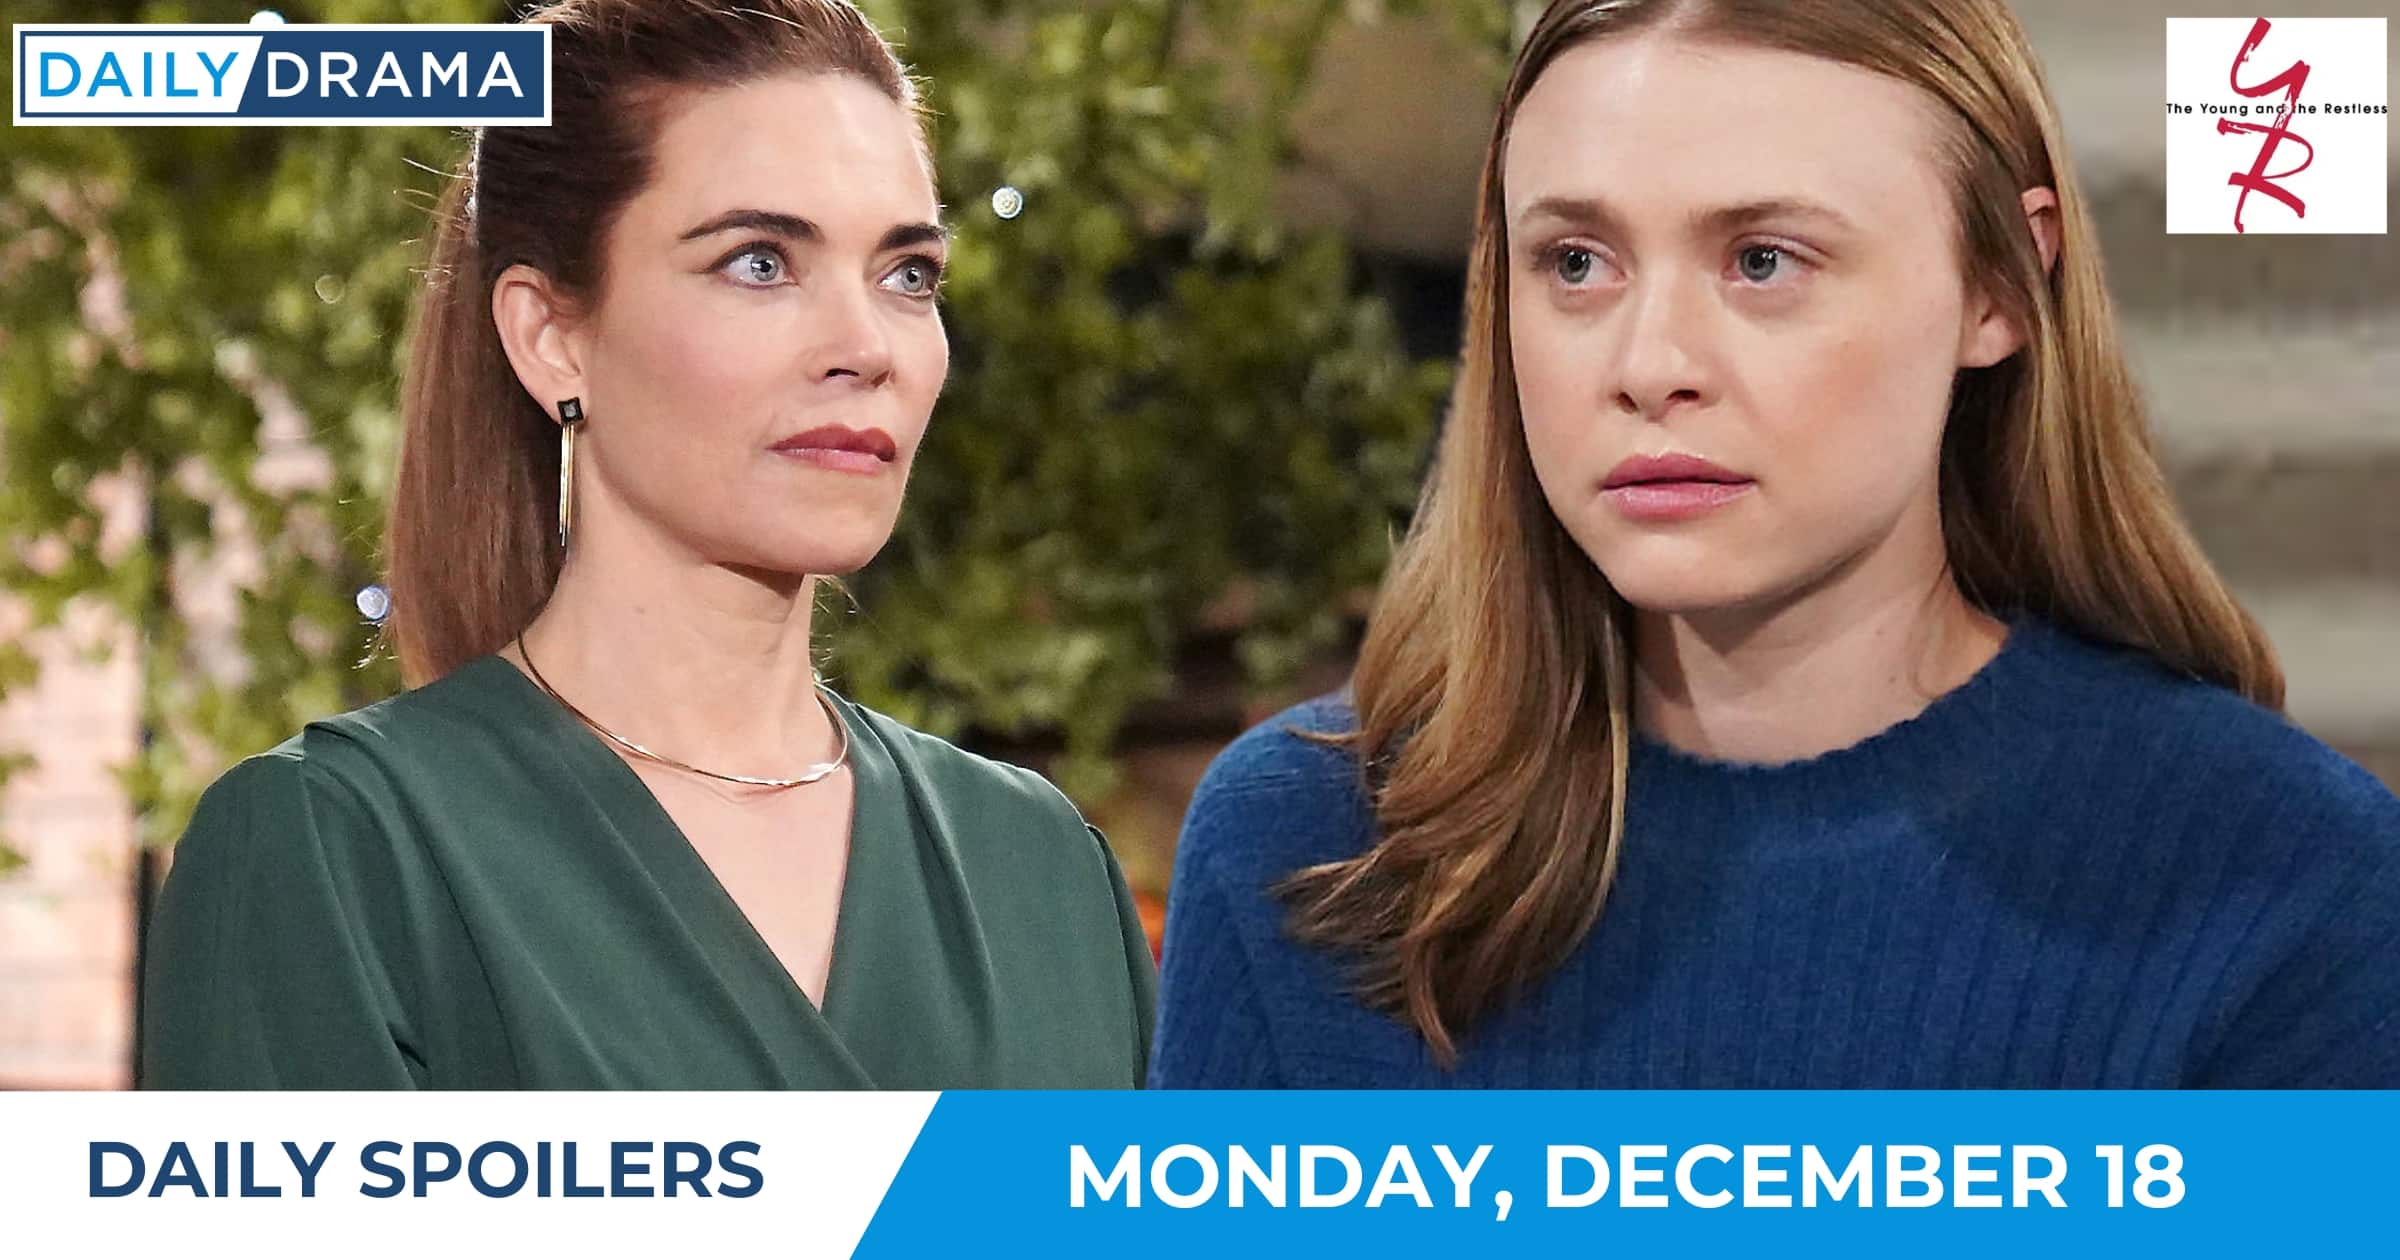 The Young and the Restless Daily Spoilers - Dec 18 - Victoria and Claire